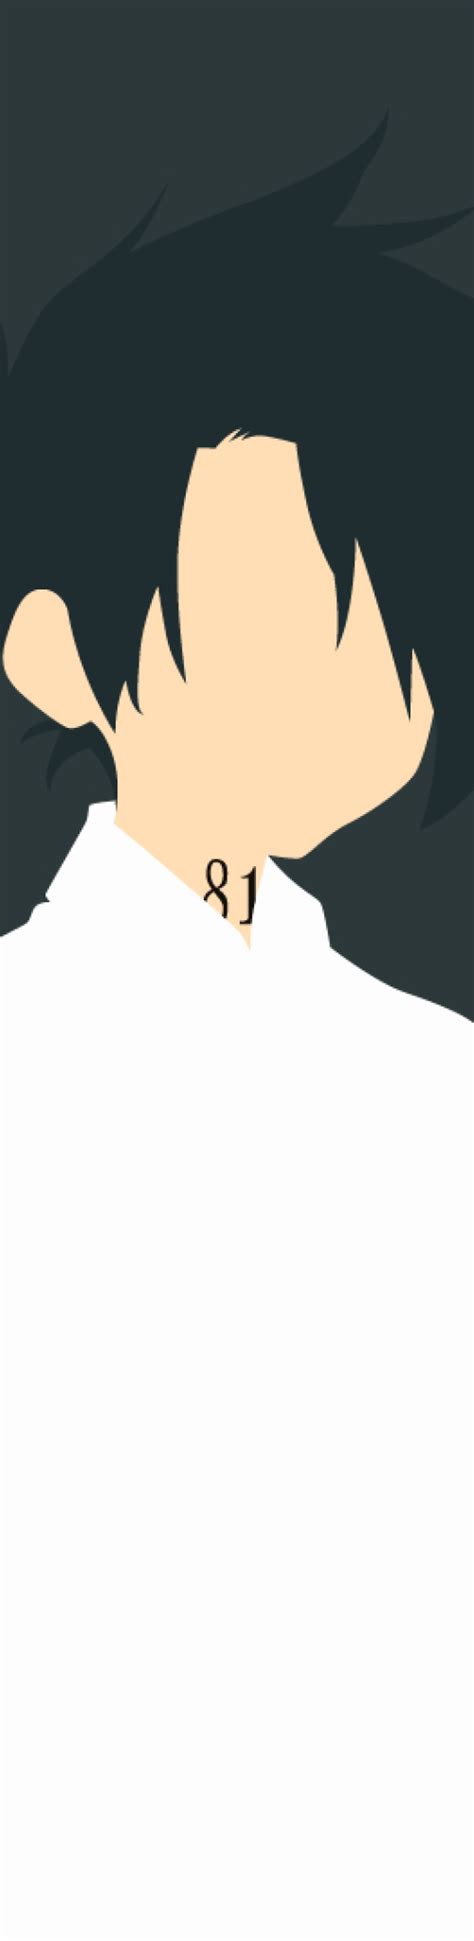 500x2048 Ray The Promised Neverland Minimal 500x2048 Resolution